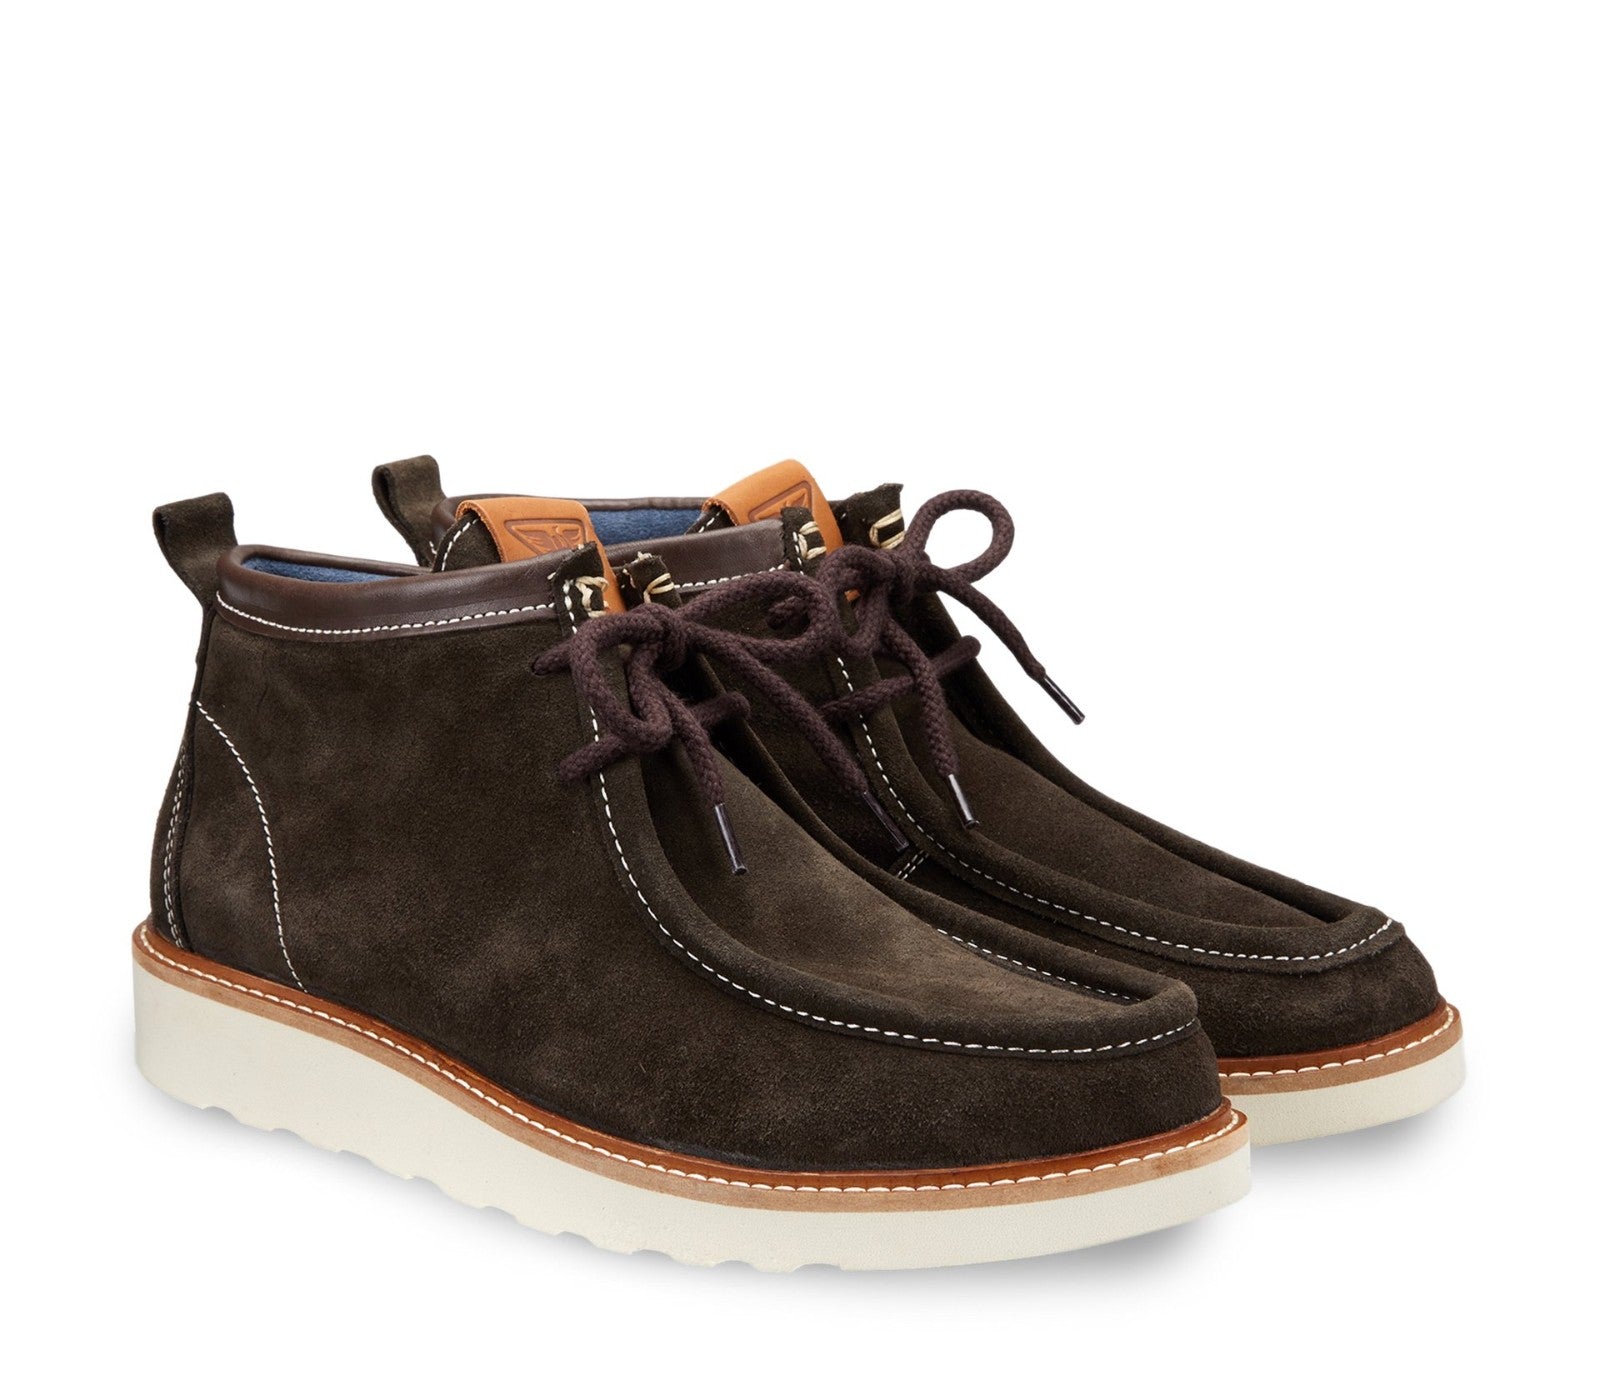 Brown Suede Boot and White Rubber Sole